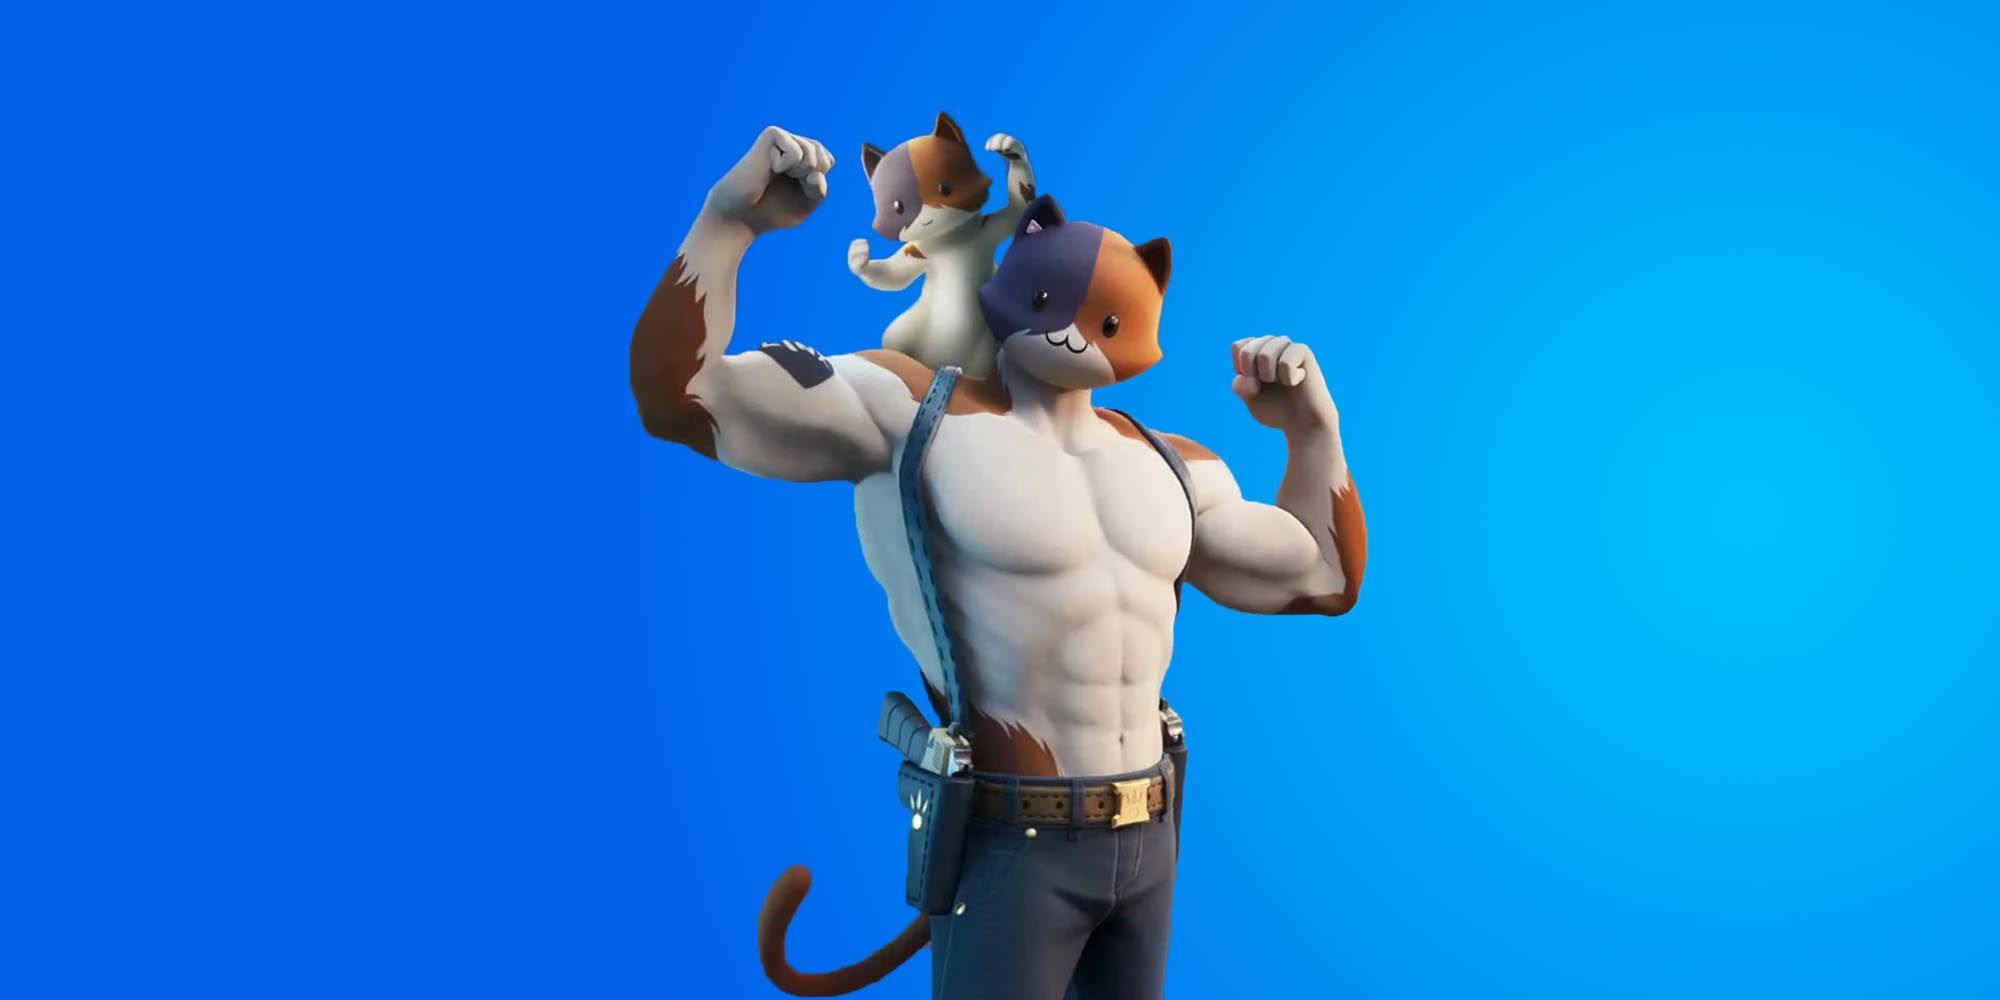 Fortnite's Meowscles posing for the Parental Controls screen